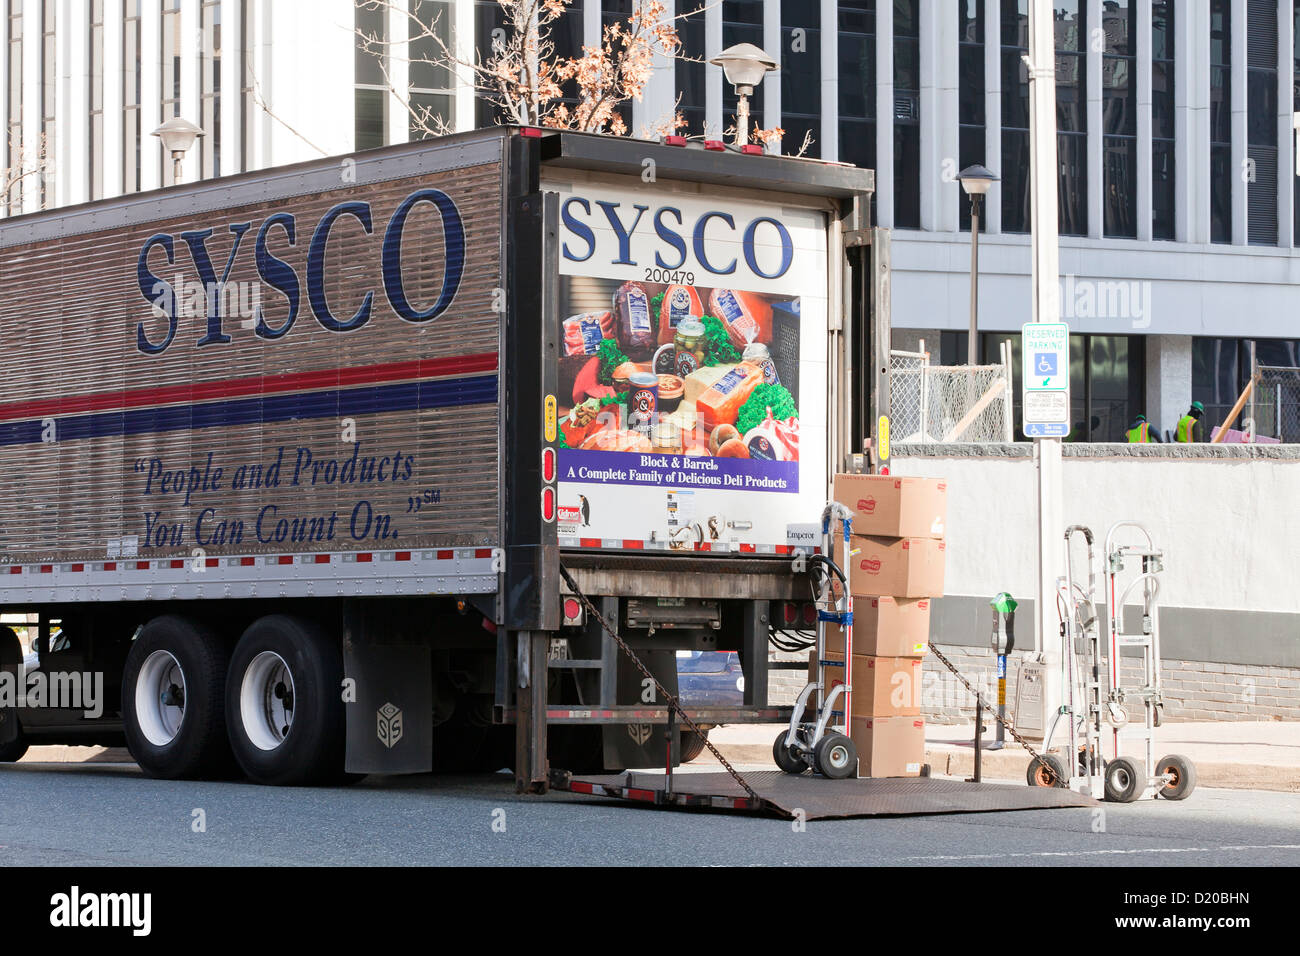 Sysco food delivery truck - Washington, DC USA Banque D'Images